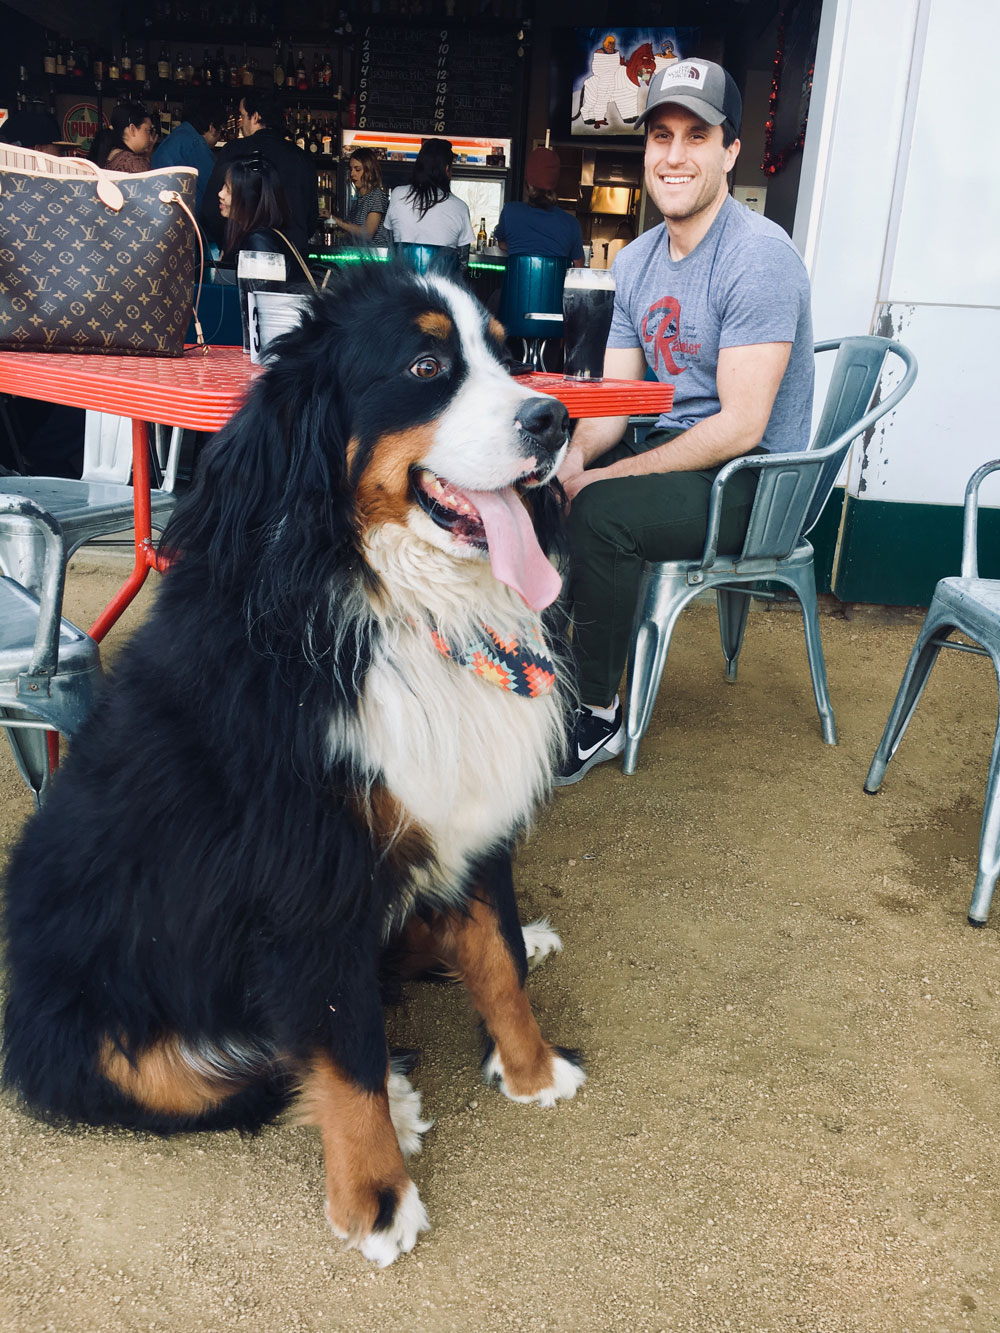 The Pump Bar in Oklahoma City's Uptown 23rd District is blogger Amanda Martin's favorite patio to bring her dog, Kylo